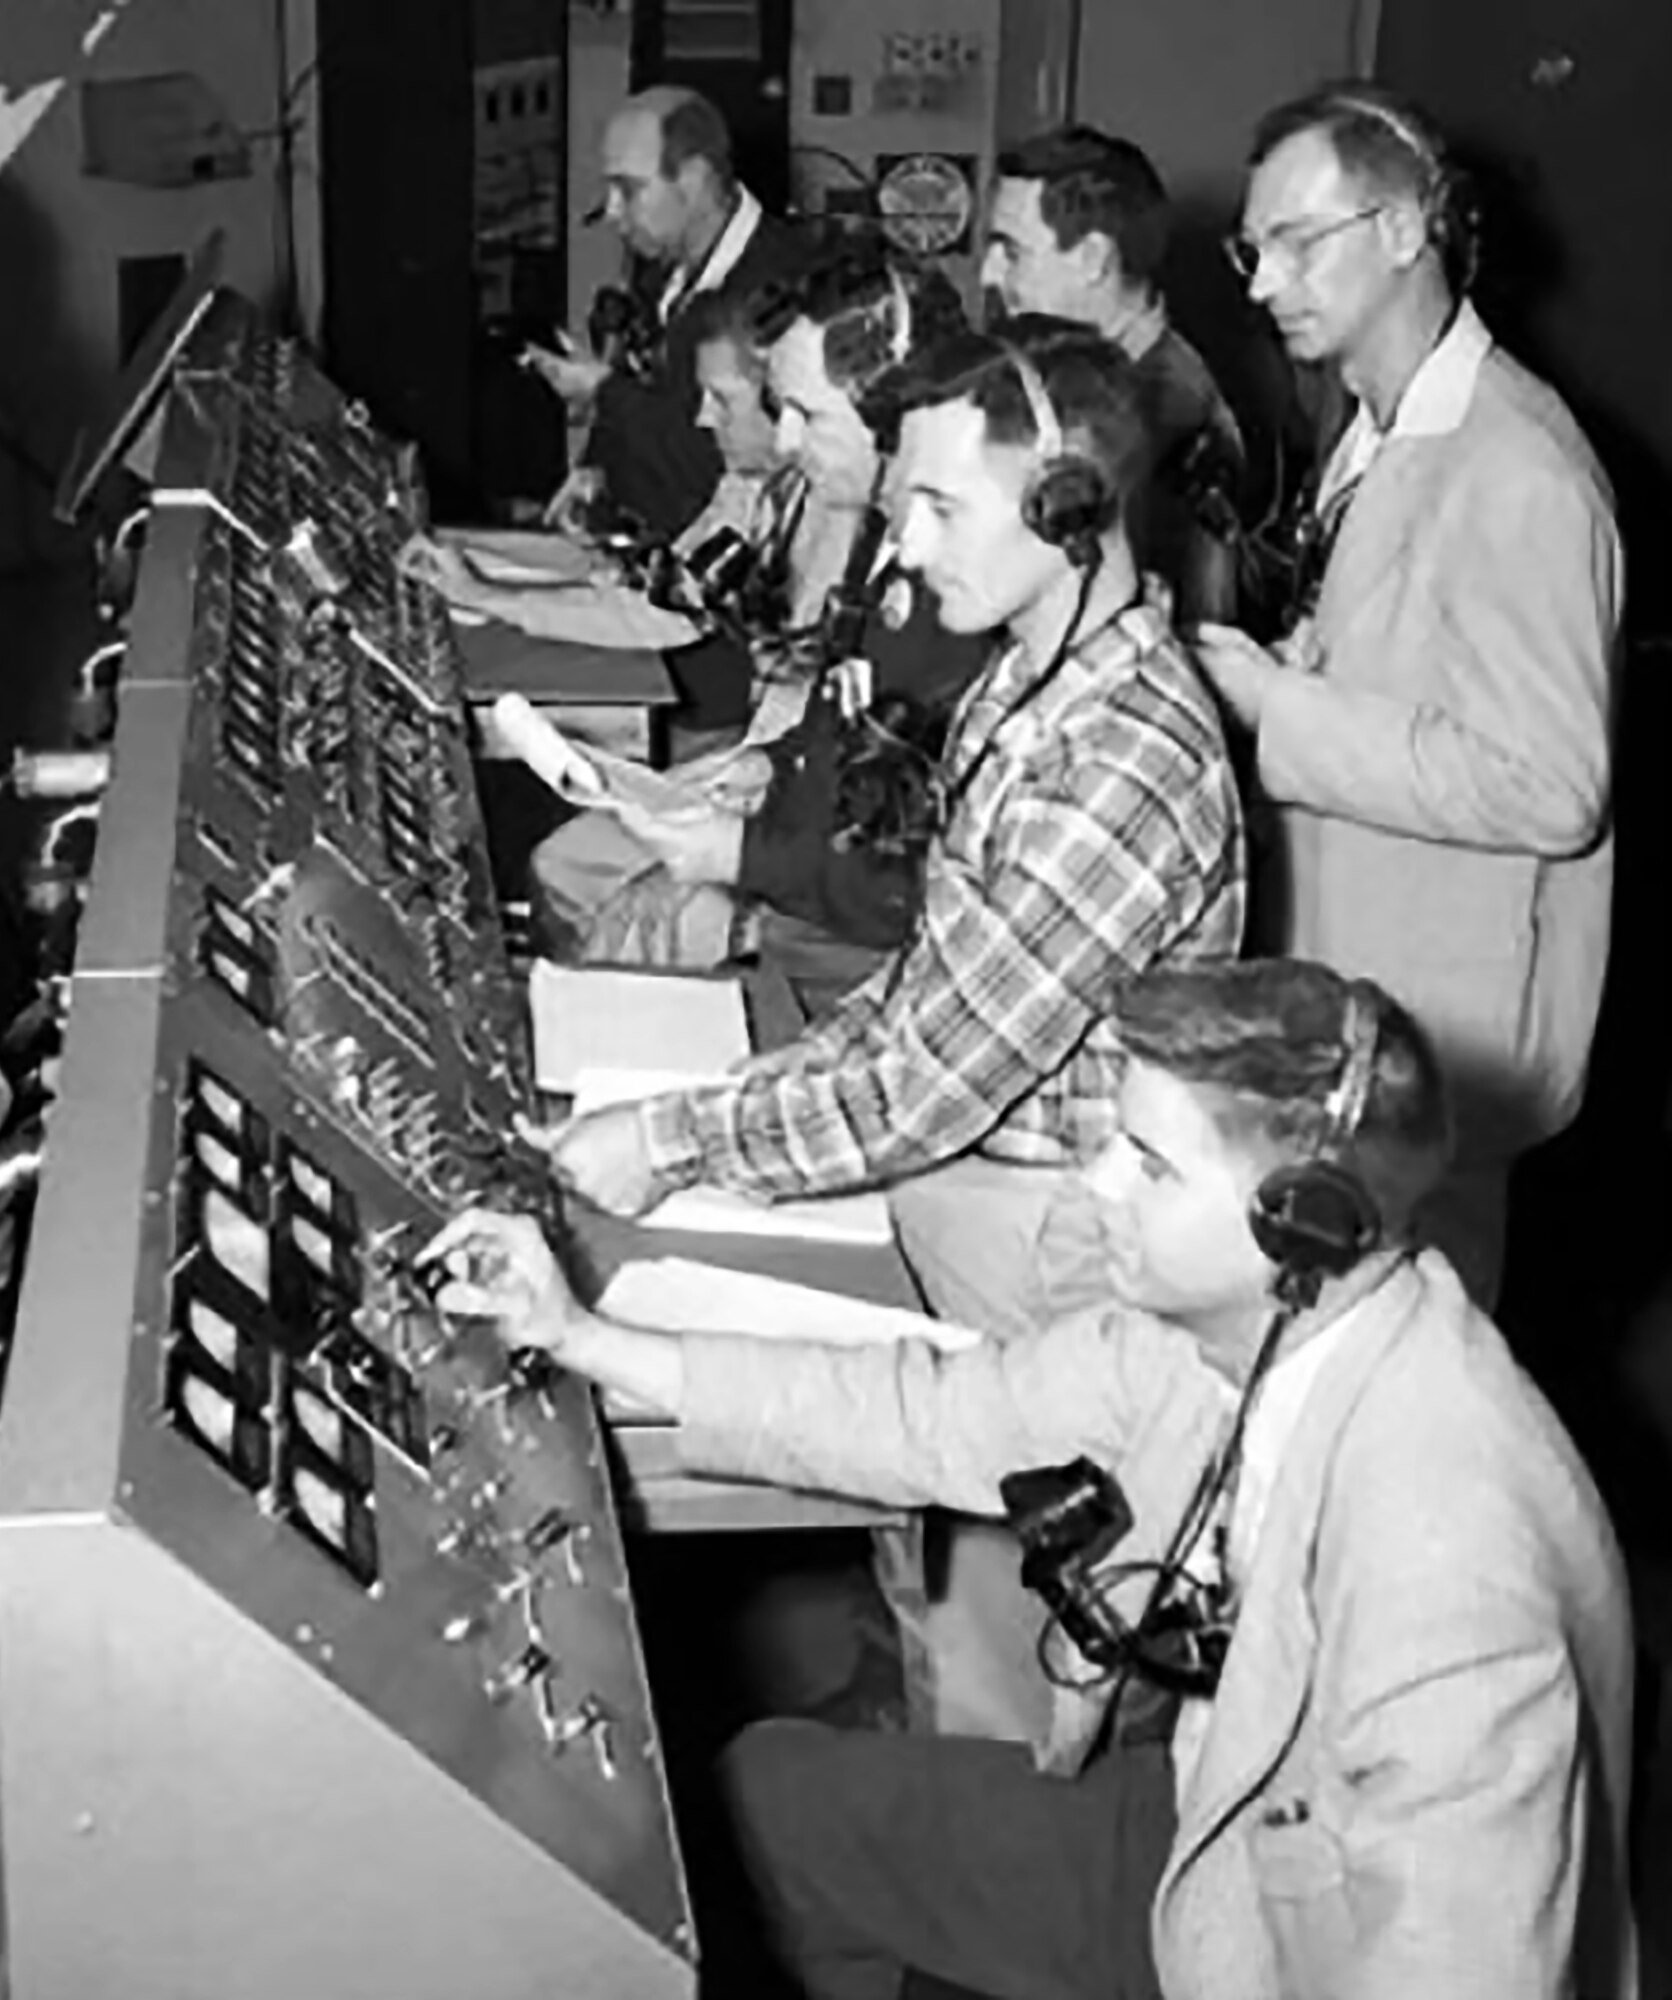 Technicians and engineers monitor the countdown for the liftoff of Explorer 1 in the control room of the blockhouse at Space Launch Complex 26 at the Cape Canaveral Missile Annex (now Cape Canaveral Air Force Station). (Courtesy photo by NASA)